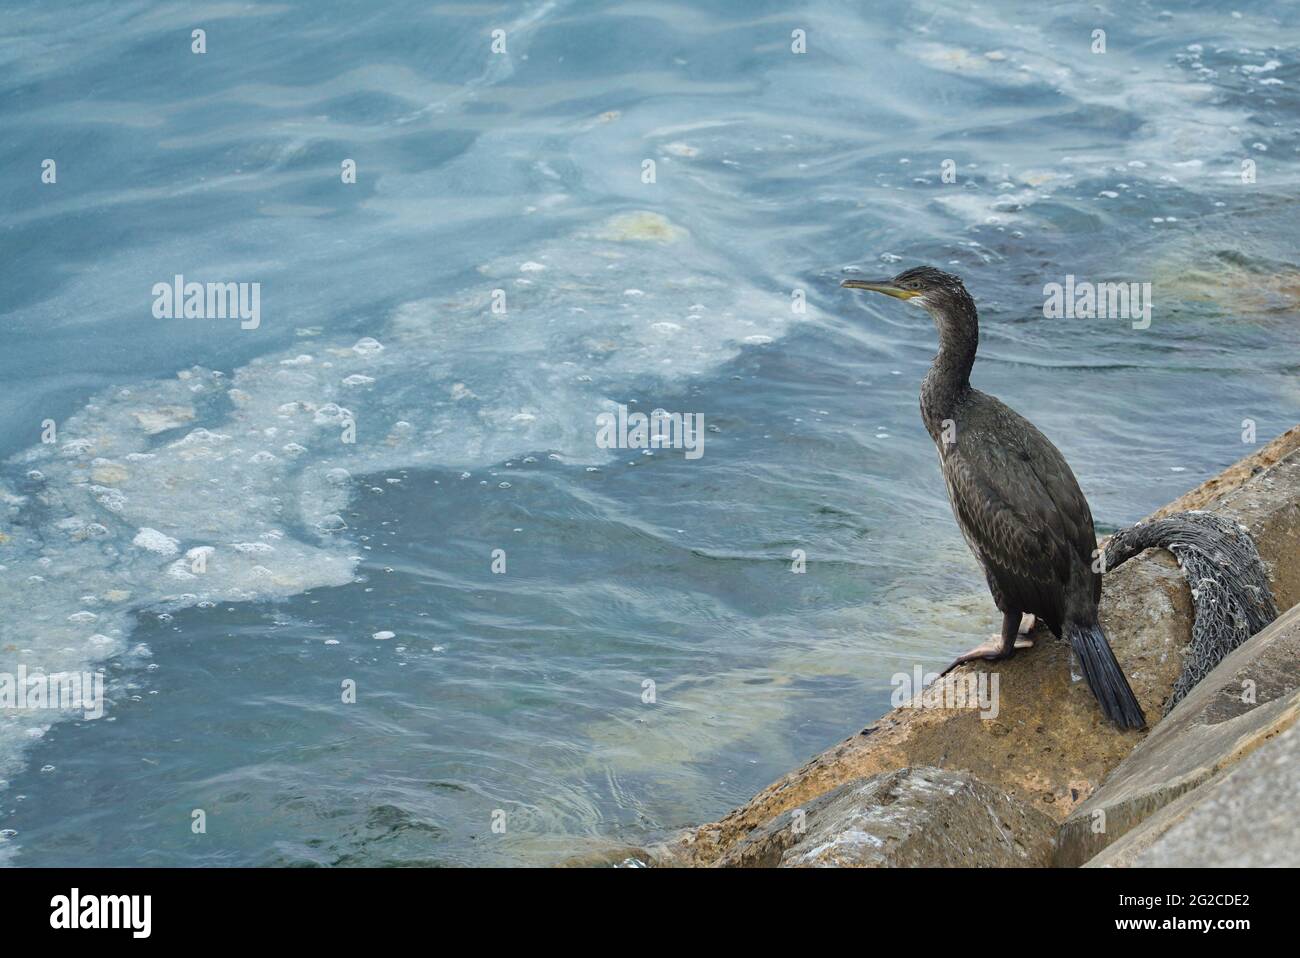 A big black cormorant sea bird on a polluted beach, after sea snot has covered the shores in Turkey. Marine and environmental pollution threaten wildl Stock Photo